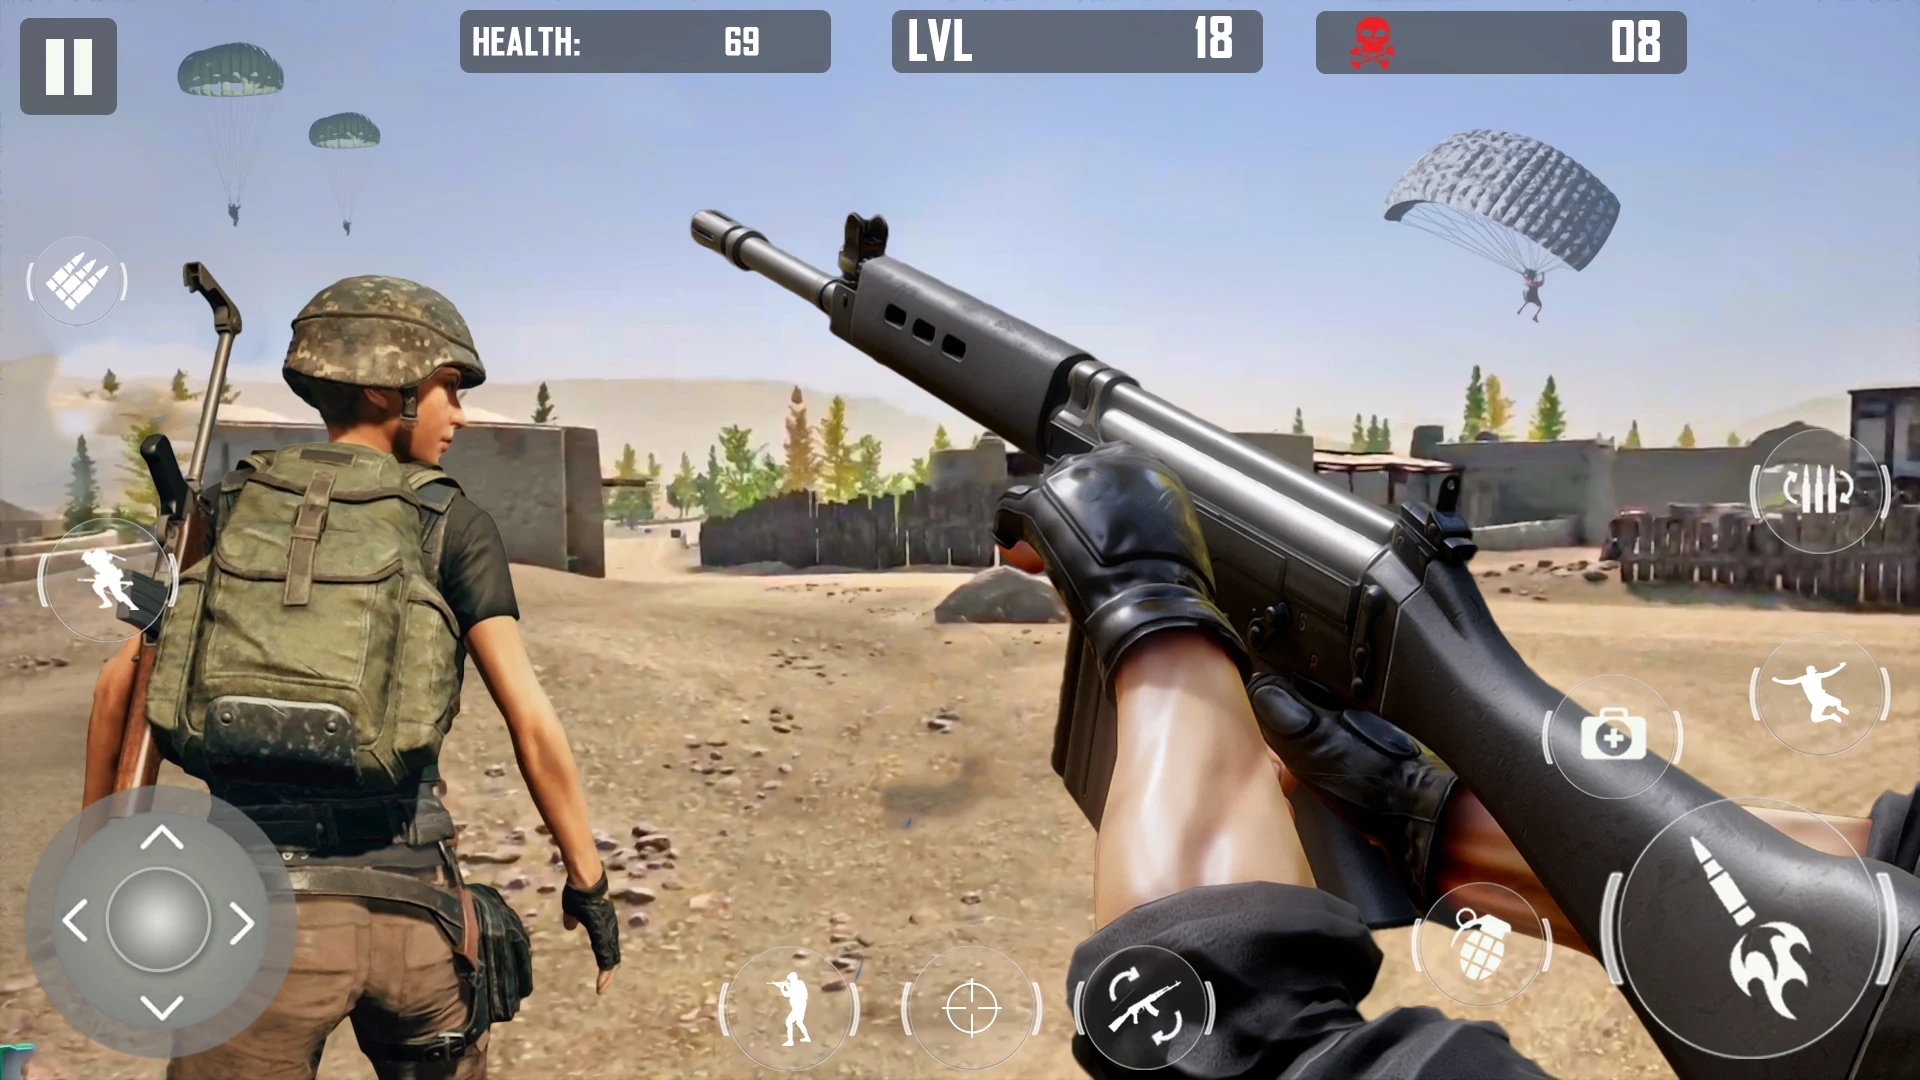 Squad Fire Gun Games - Battleg Game for Android